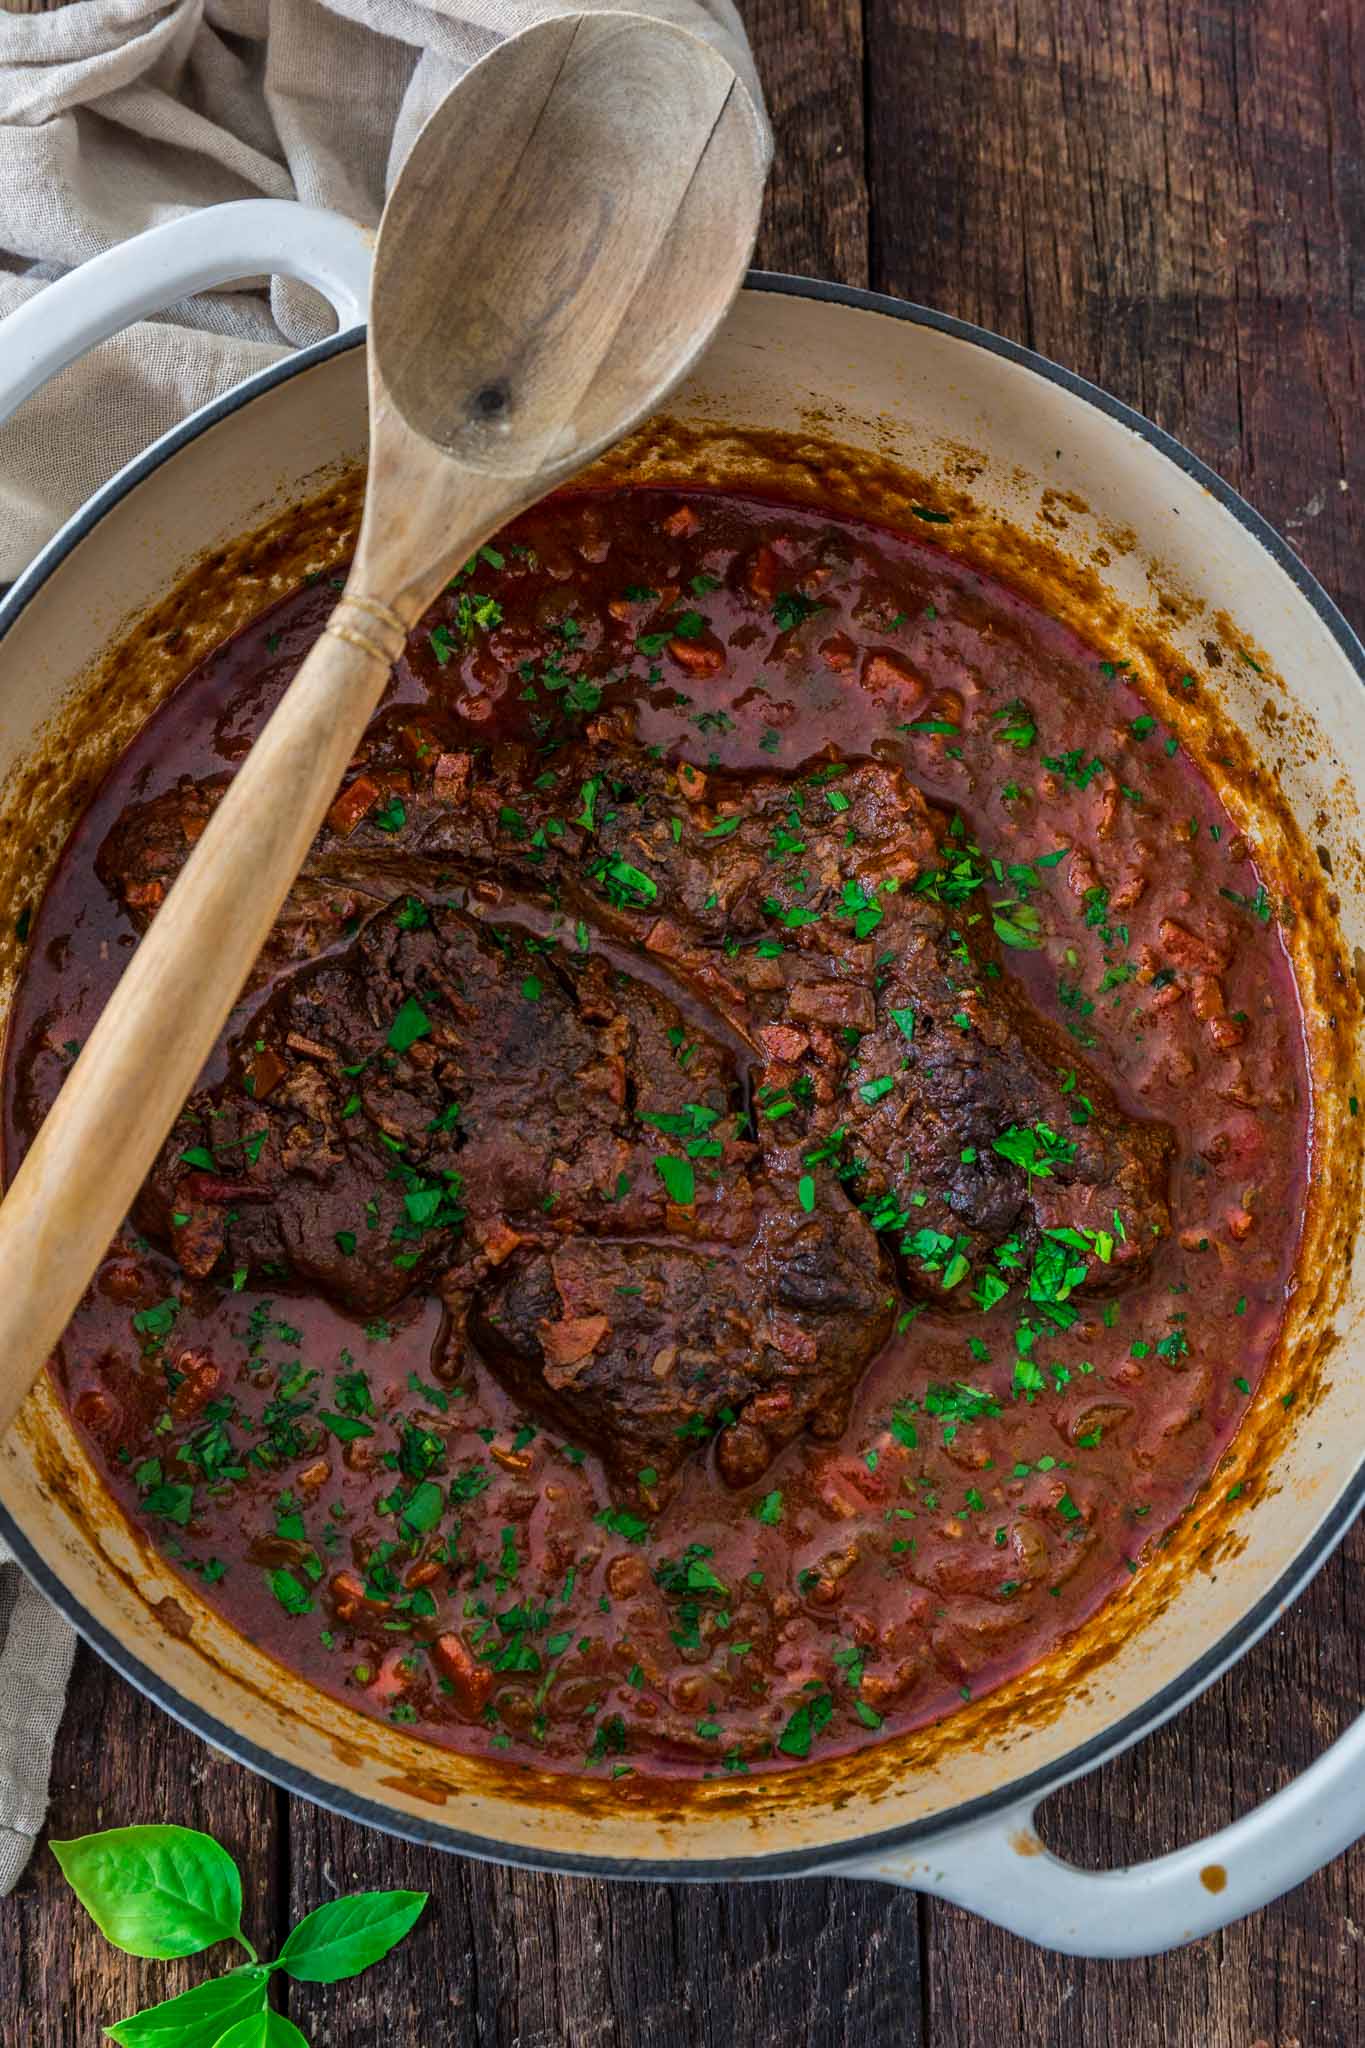 Italian Pot Roast (Stracotto alla Fiorentina) | www.oliviascuisine.com | Cold weather calls for comfort food, like this hearty and cozy Italian Pot Roast. It is made Tuscan style, simmering for hours in a delicious tomato sauce to ensure deep rich flavors while filling your home with the most amazing smells! (Recipe and food photography by @oliviascuisine.)